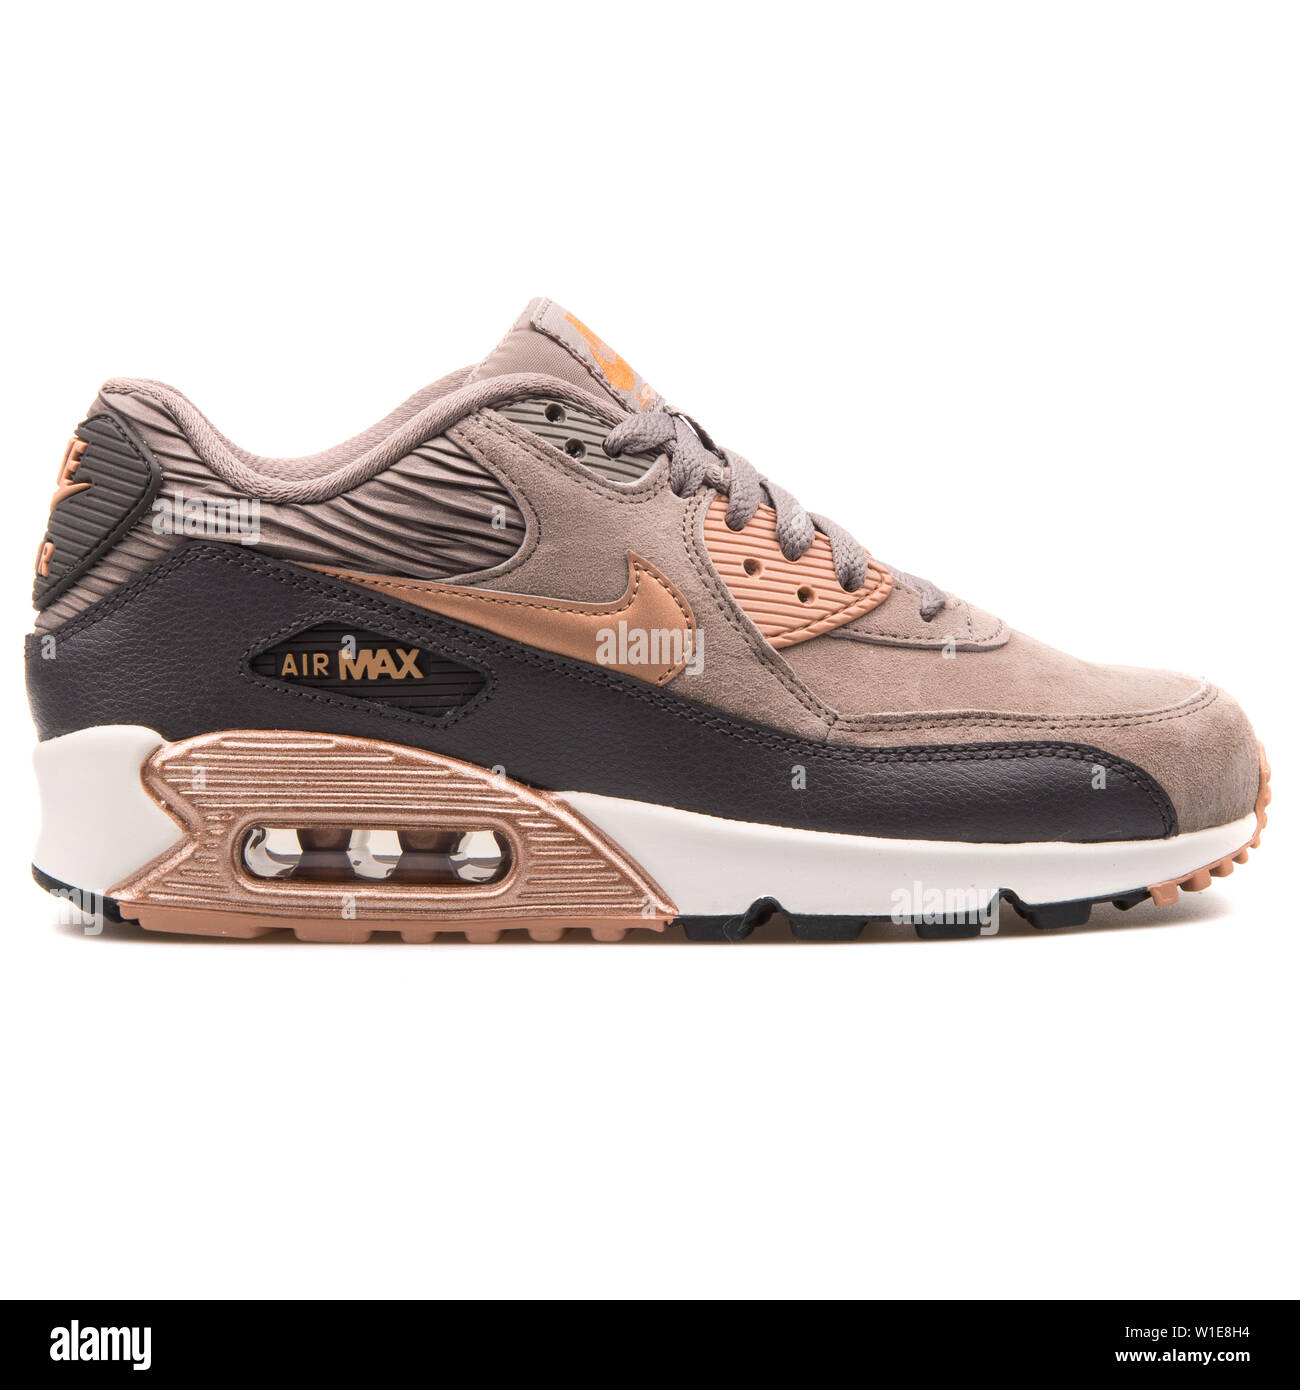 VIENNA, AUSTRIA - AUGUST 25, 2017: Nike Air Max 90 Leather bronze and beige  sneaker on white background Stock Photo - Alamy